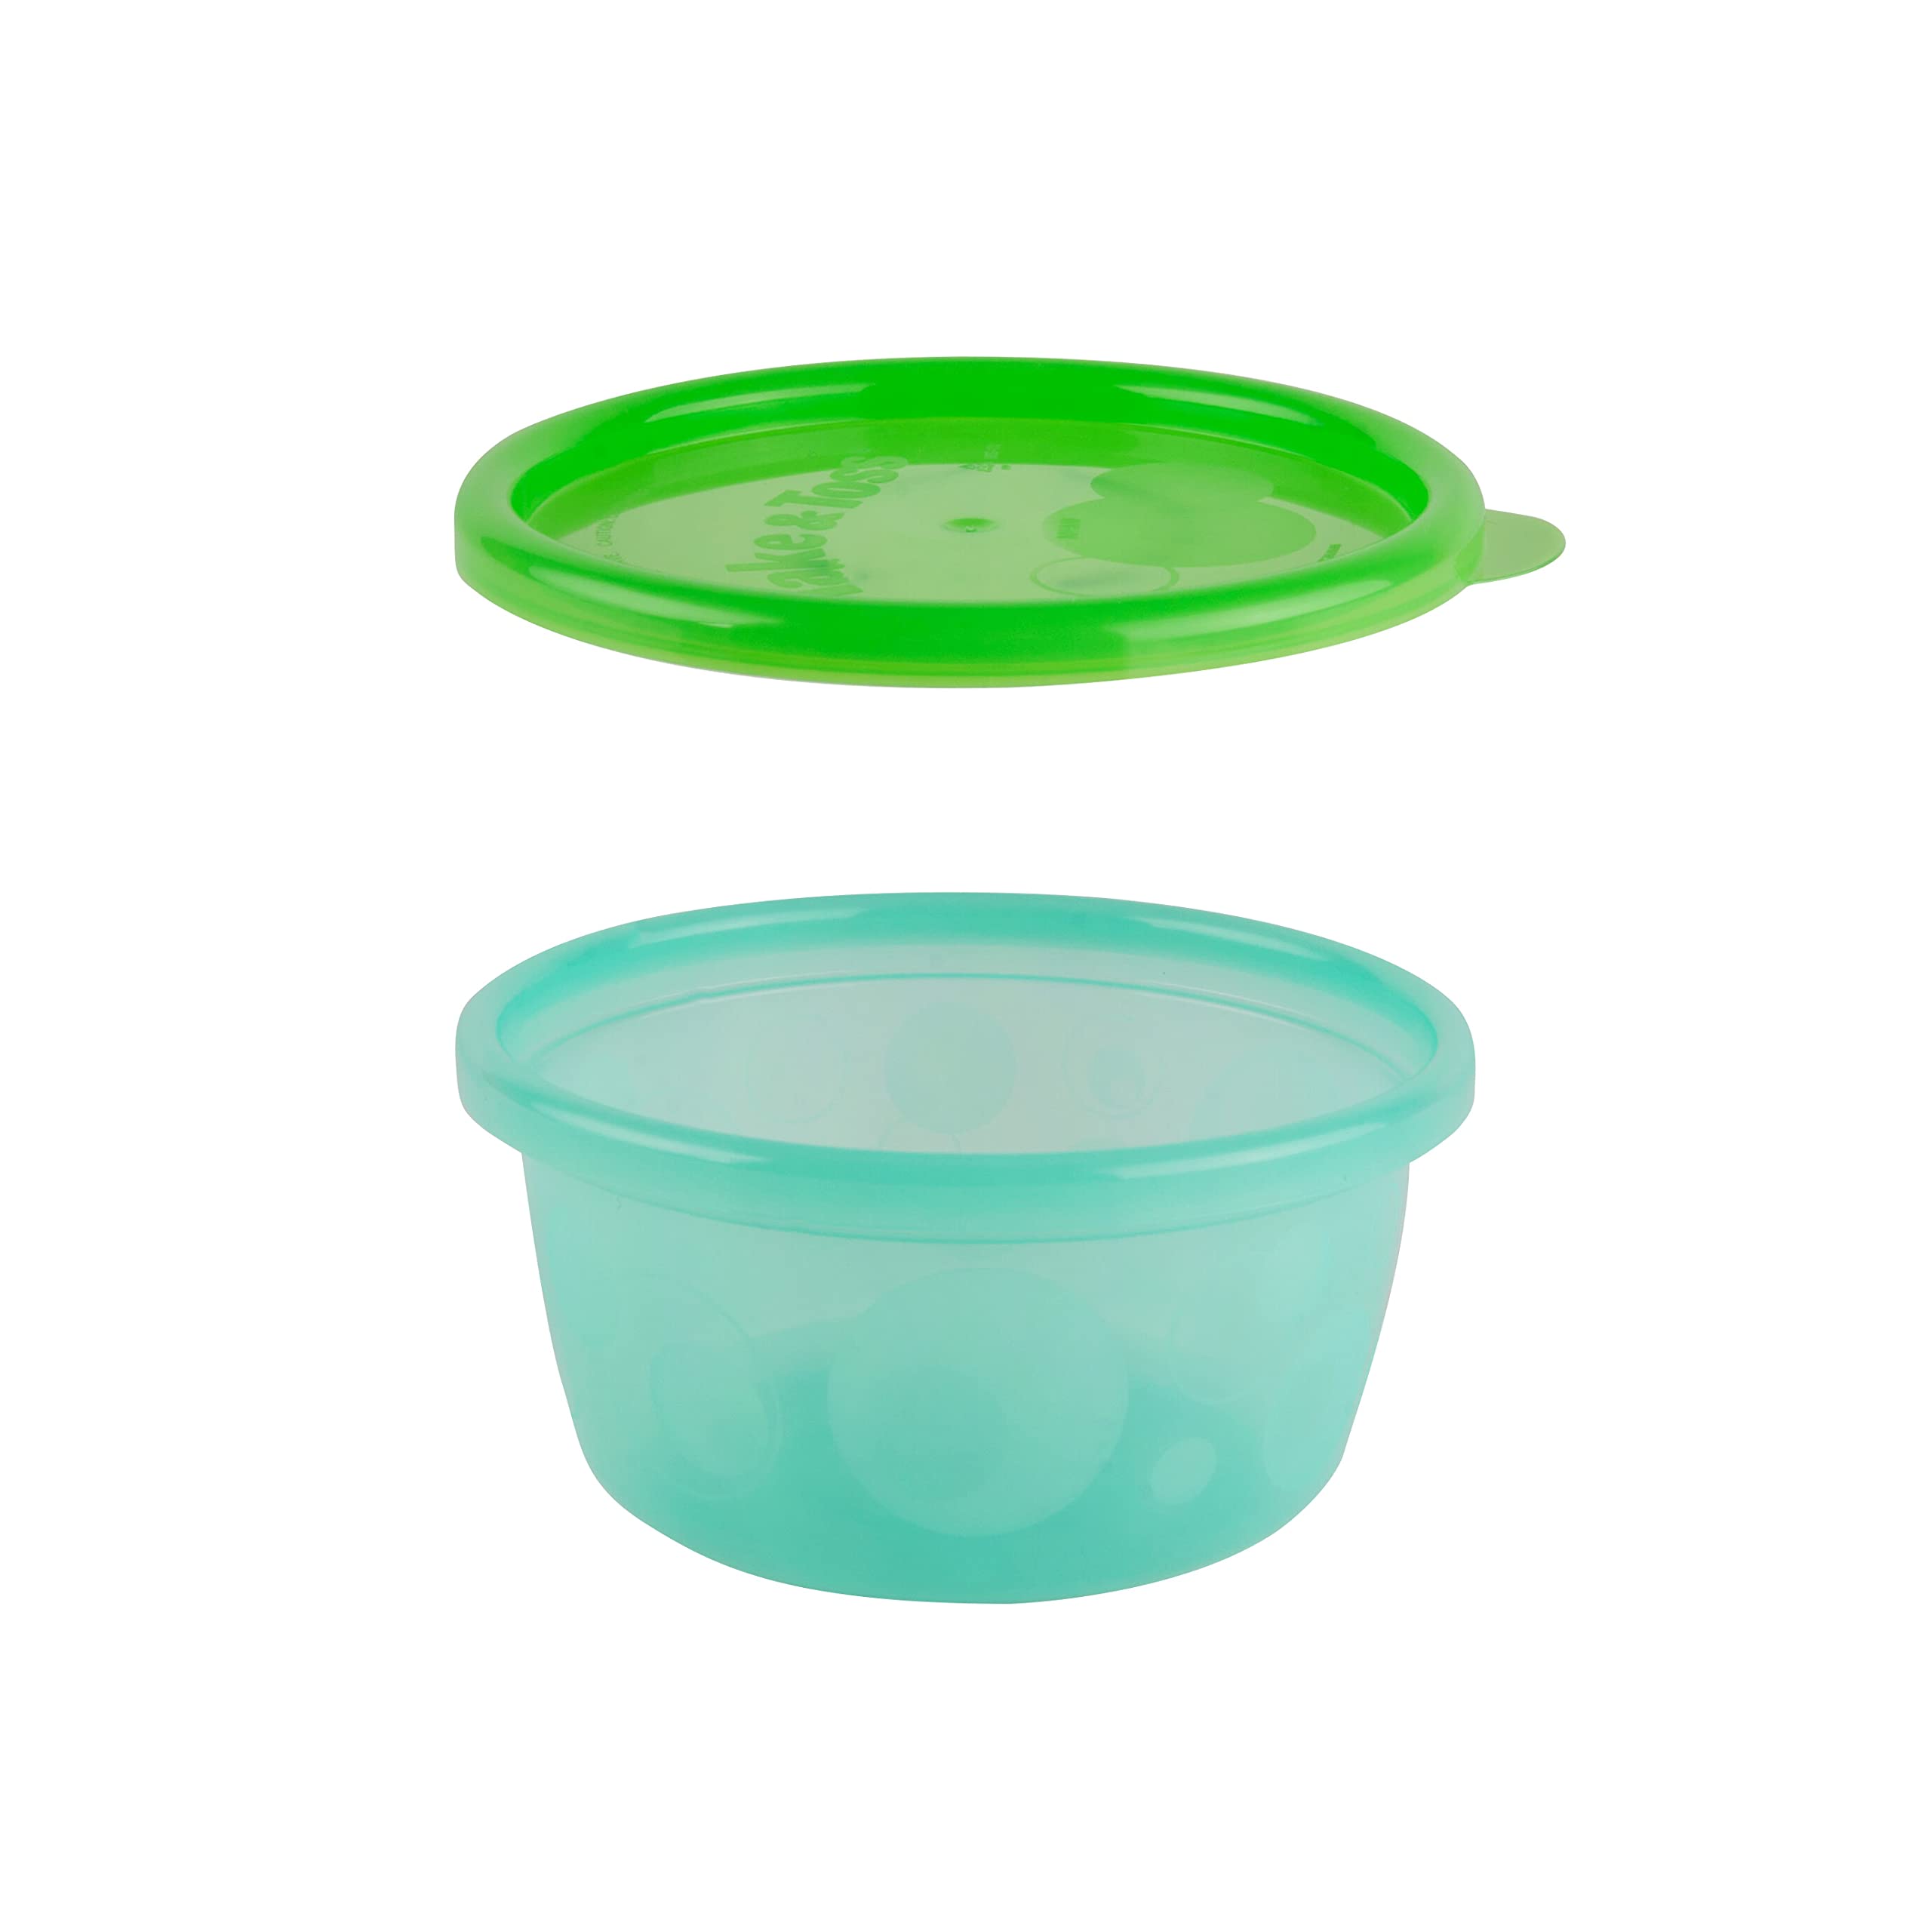 The First Years Take and Toss Toddler Feeding Value Set - Includes Dishwasher Safe Toddler Bowls with Snap-On Lids - 20 Count